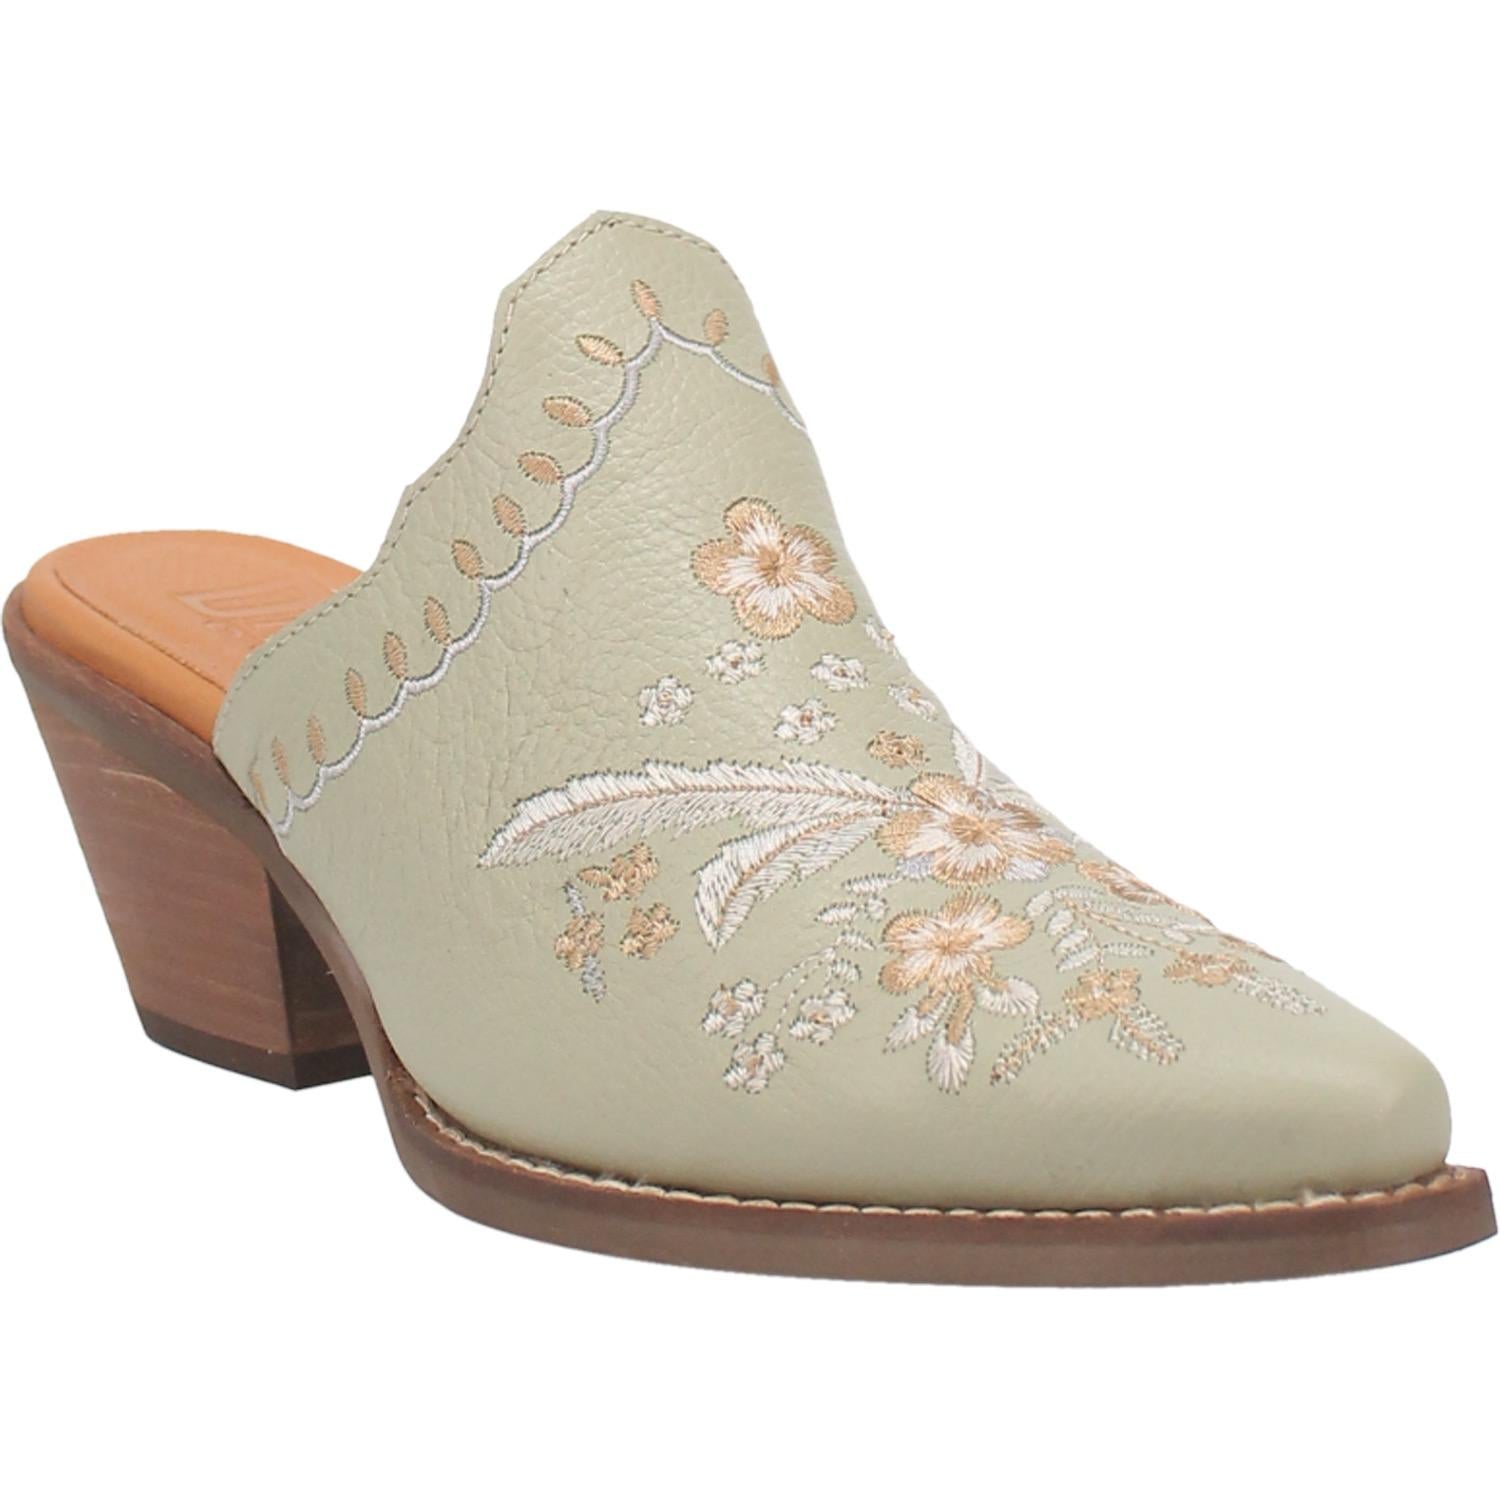 A mint bootie with a white and cream floral and feather design on the upper, a white and cream stitched design on the edge, and a short heel